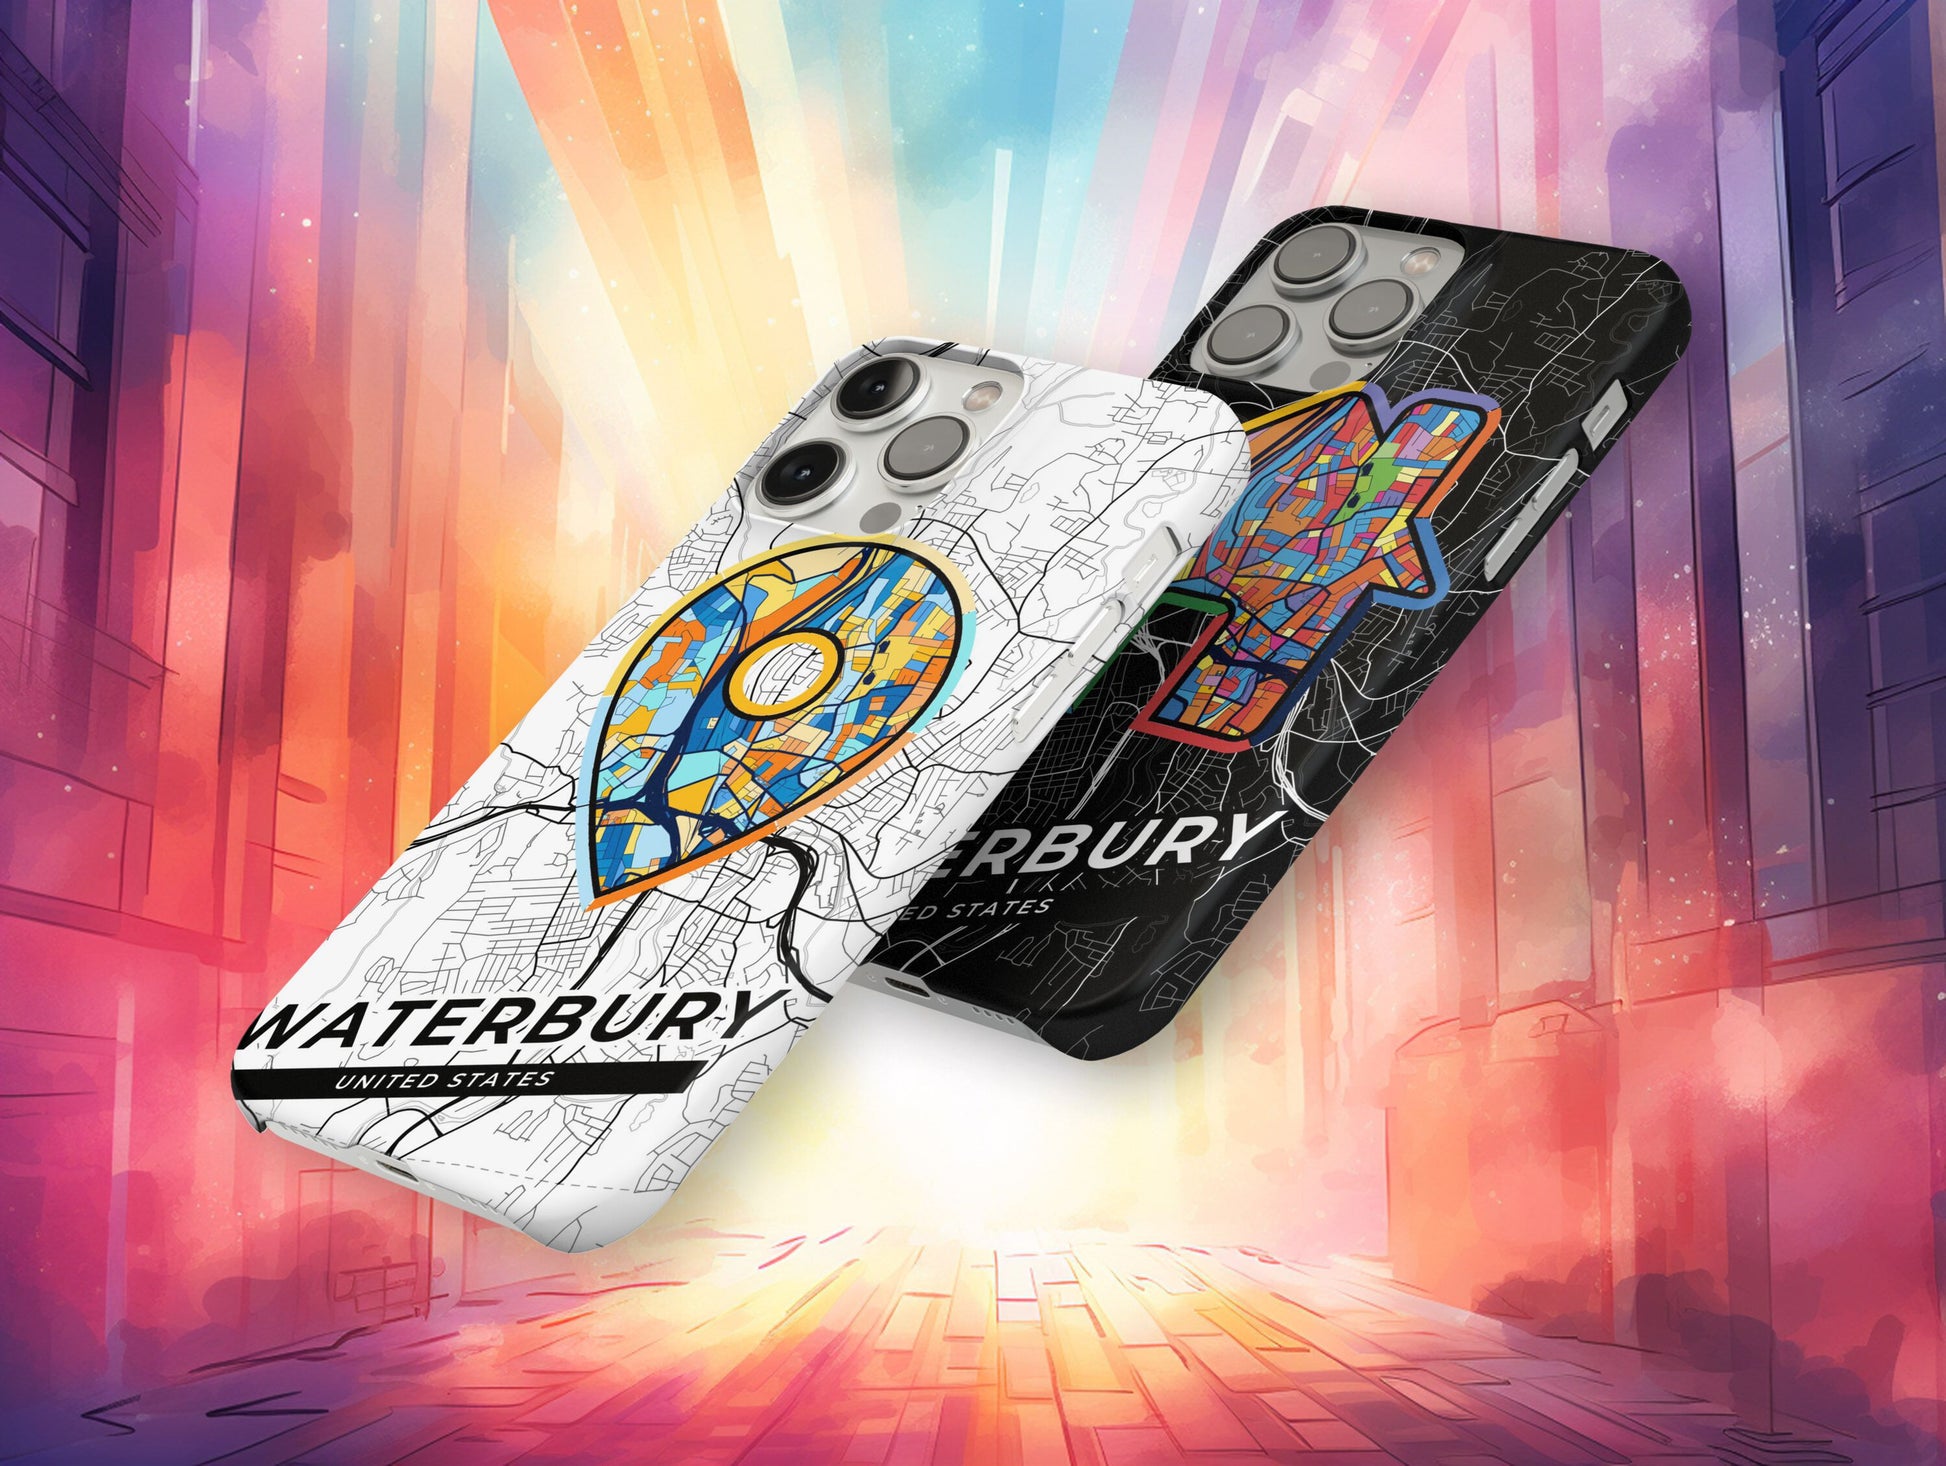 Waterbury Connecticut slim phone case with colorful icon